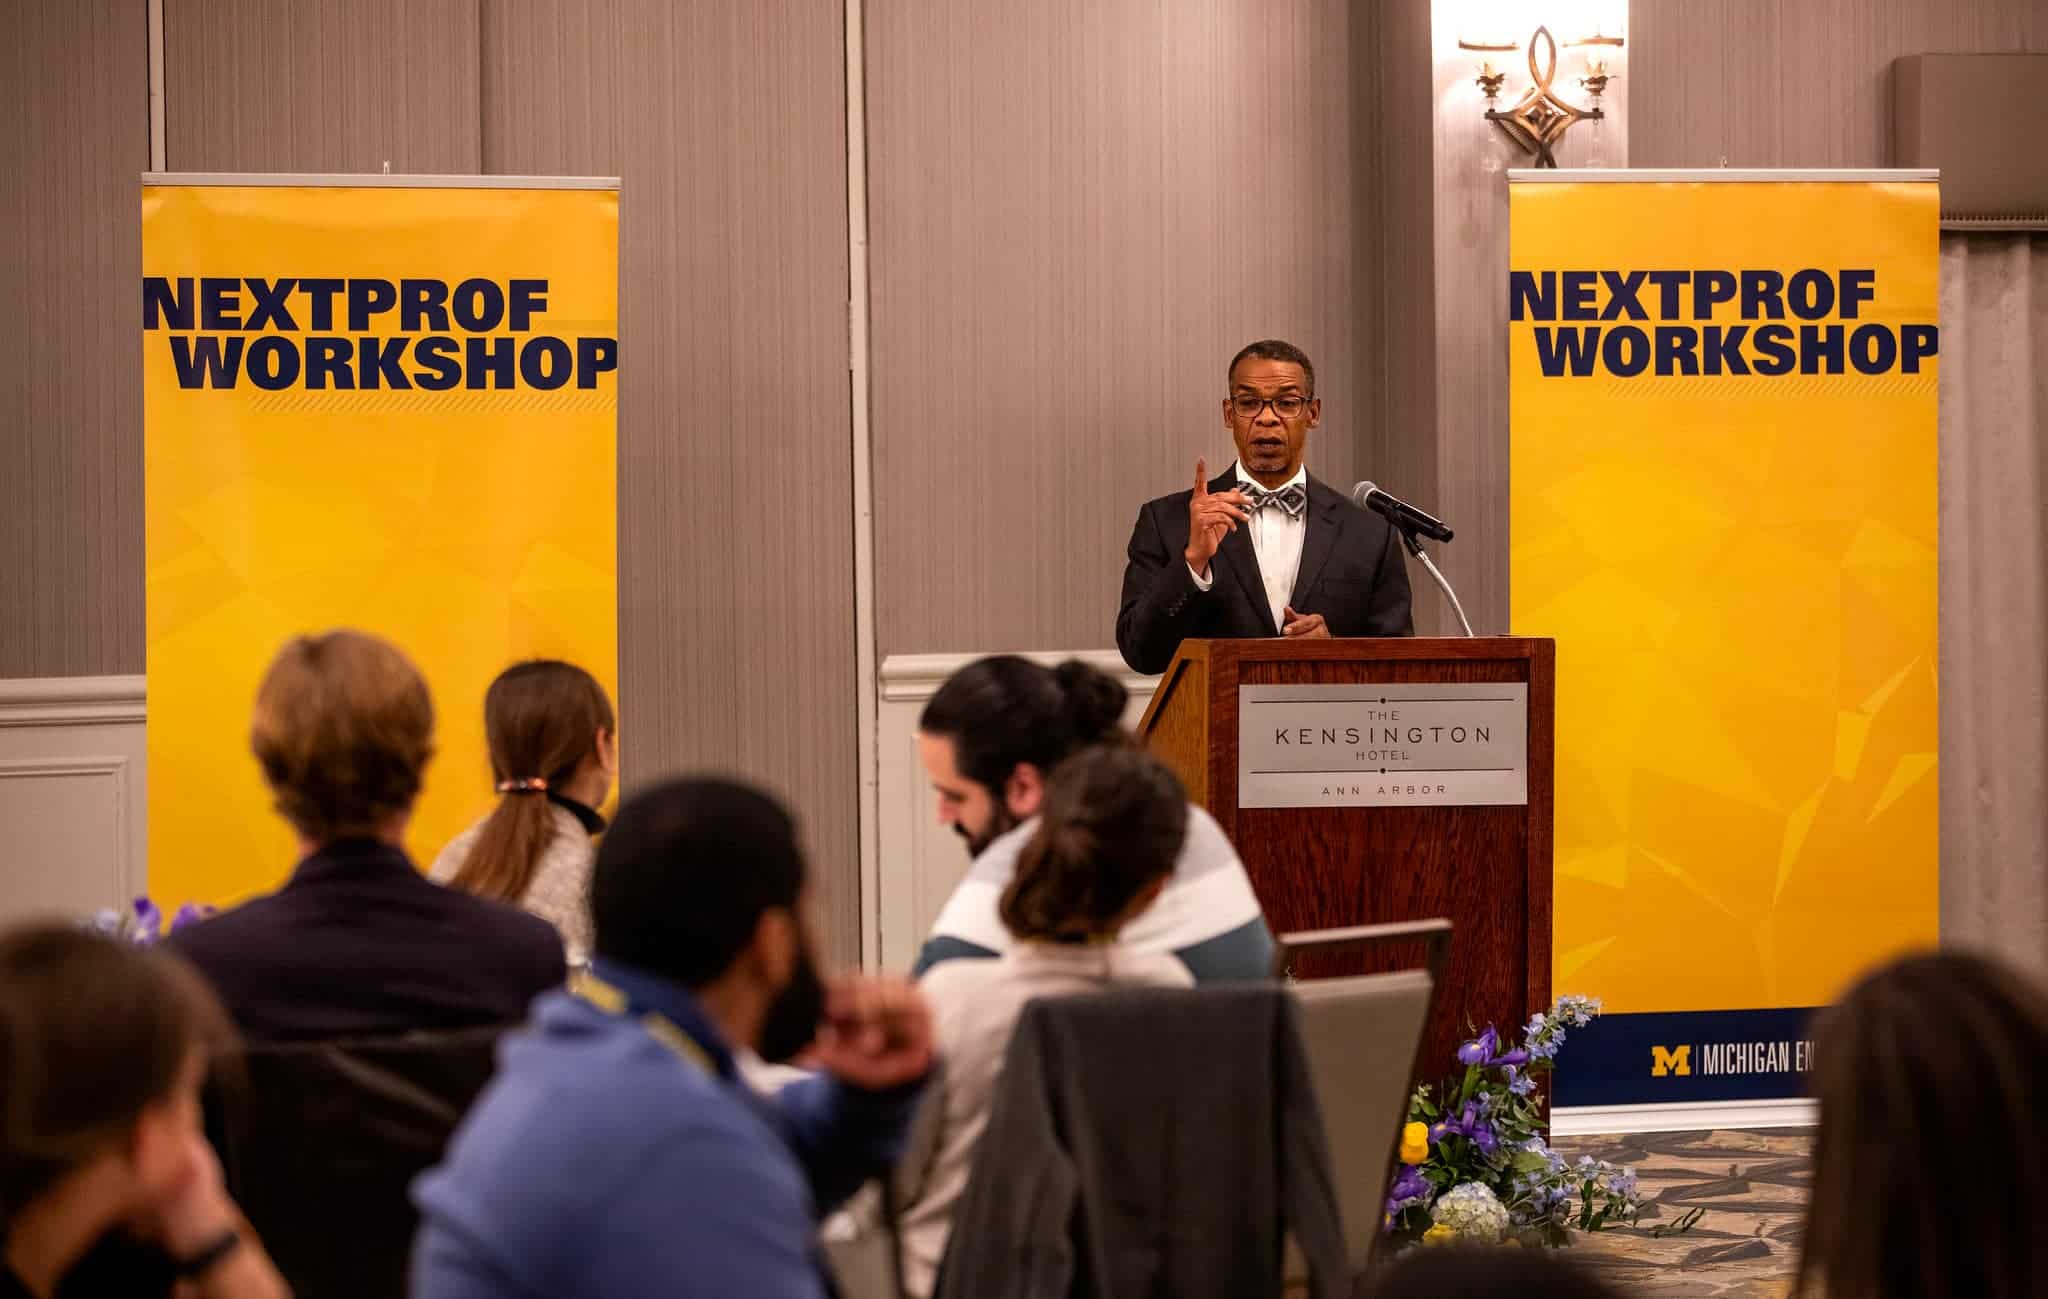 Black man at podium between two bright yellow banners with the words "Nextprof workshop" on both